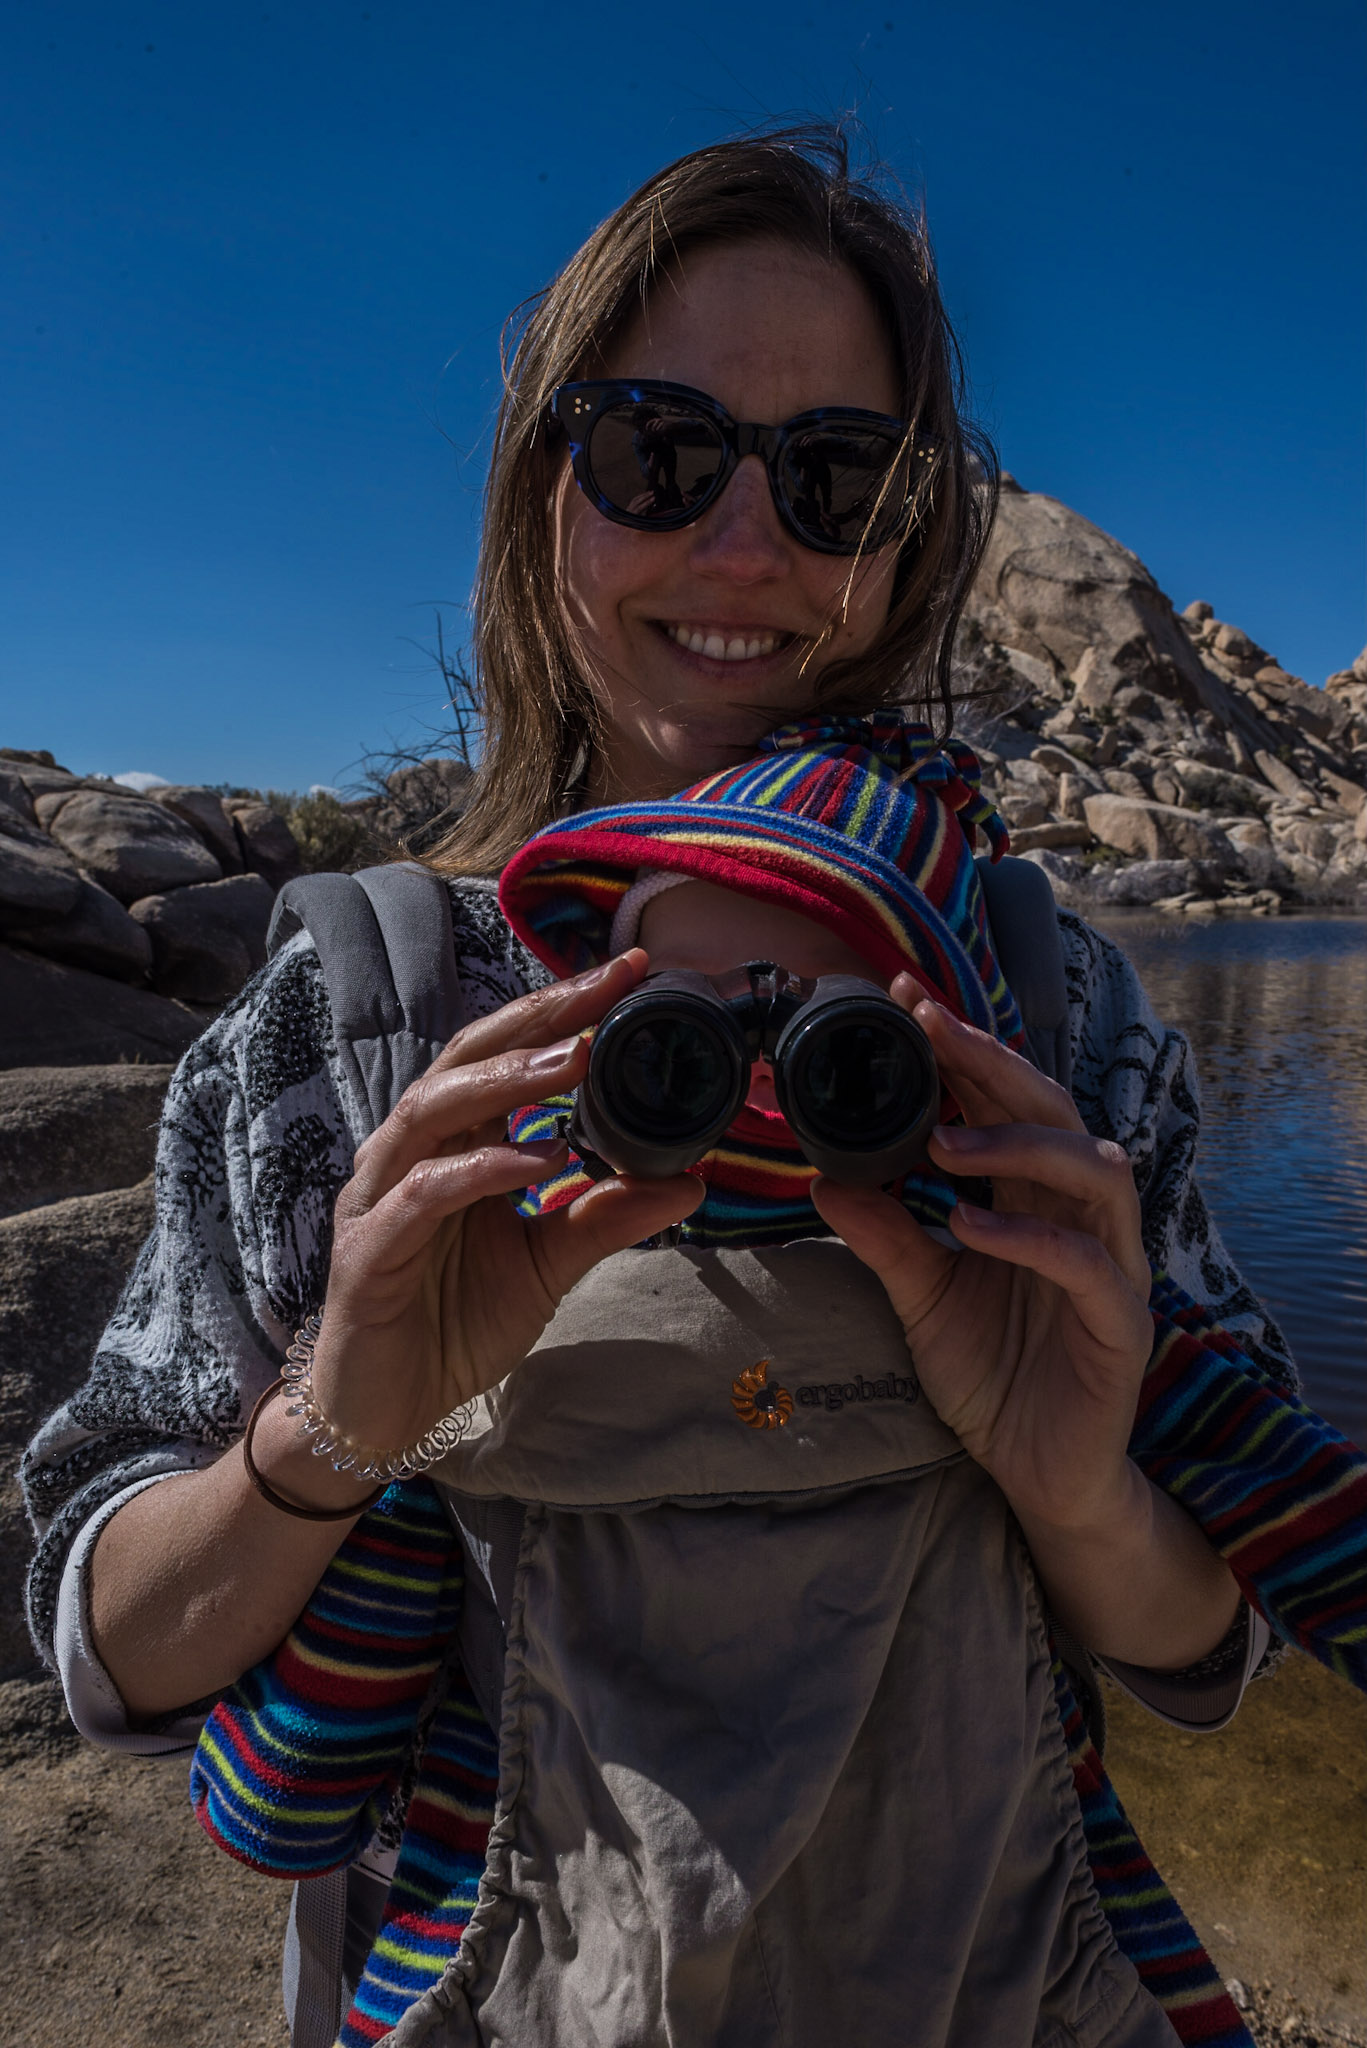 A woman carries a baby in a sling, holding a pair of binoculars up to the baby's face. In the background is the rocky landscape with a lake.